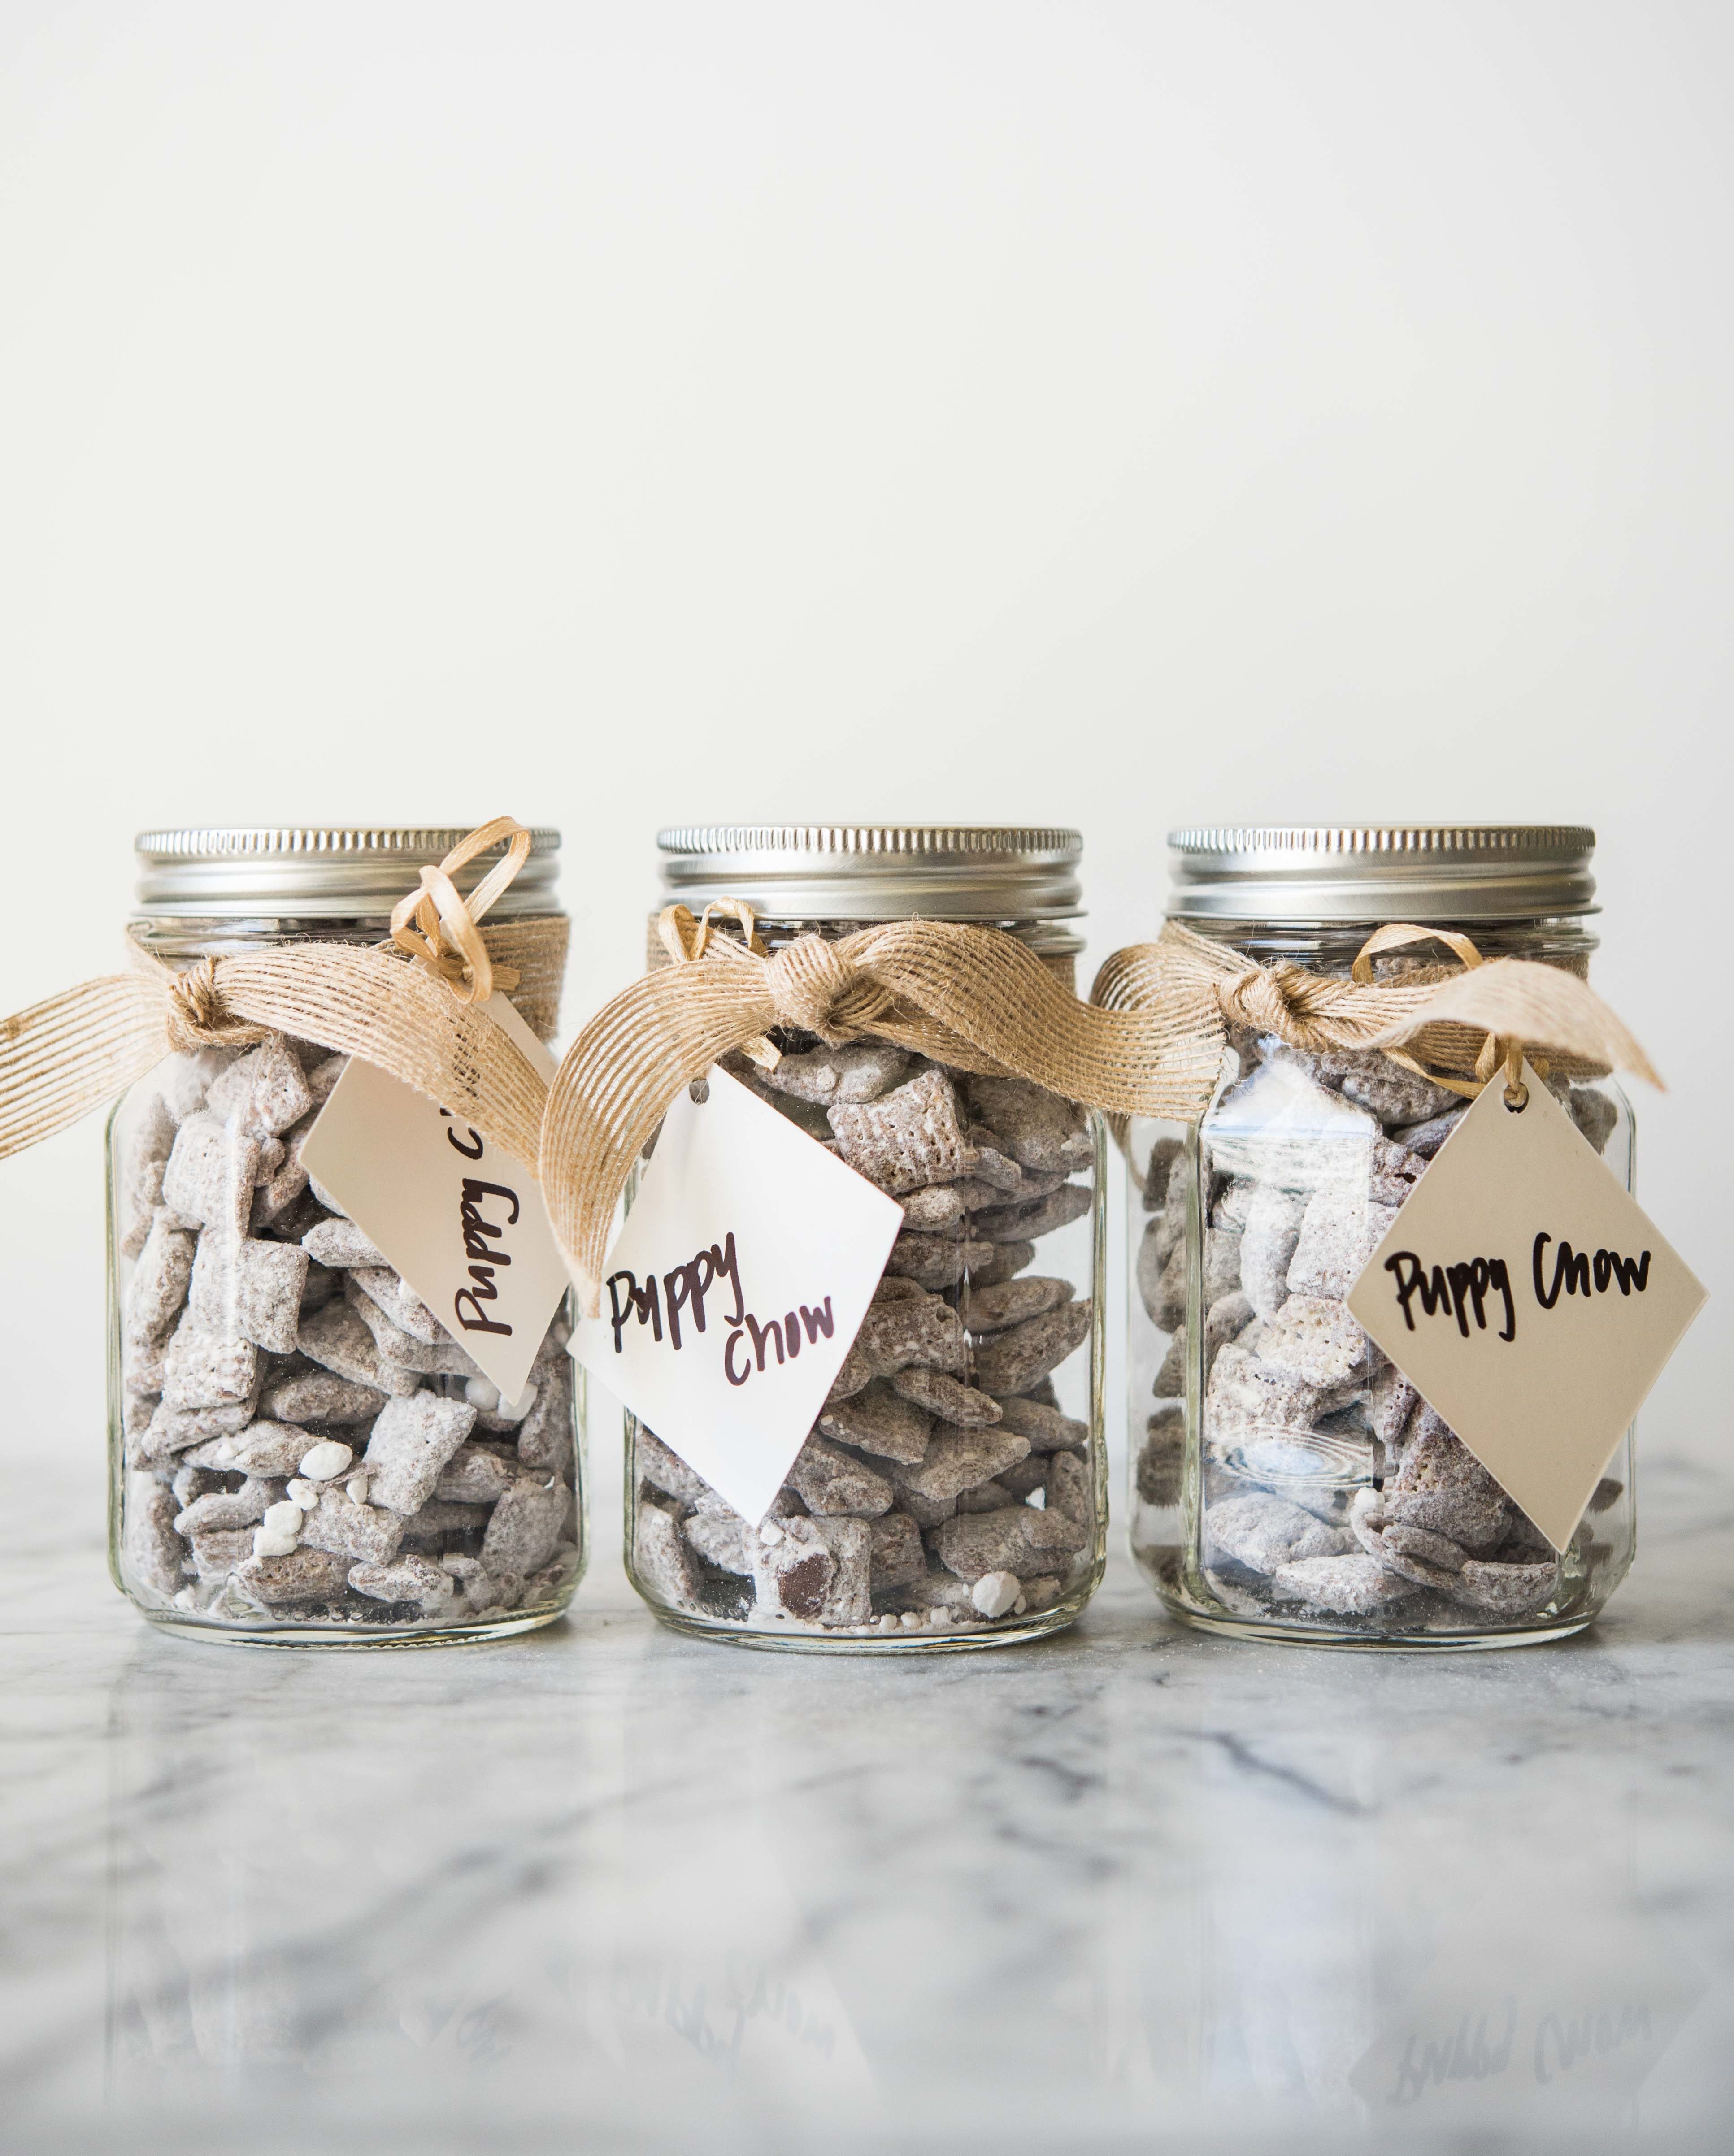 3 jars of puppy chow in glass jars with a brown ribbon wrapped around each and a gift tag attached